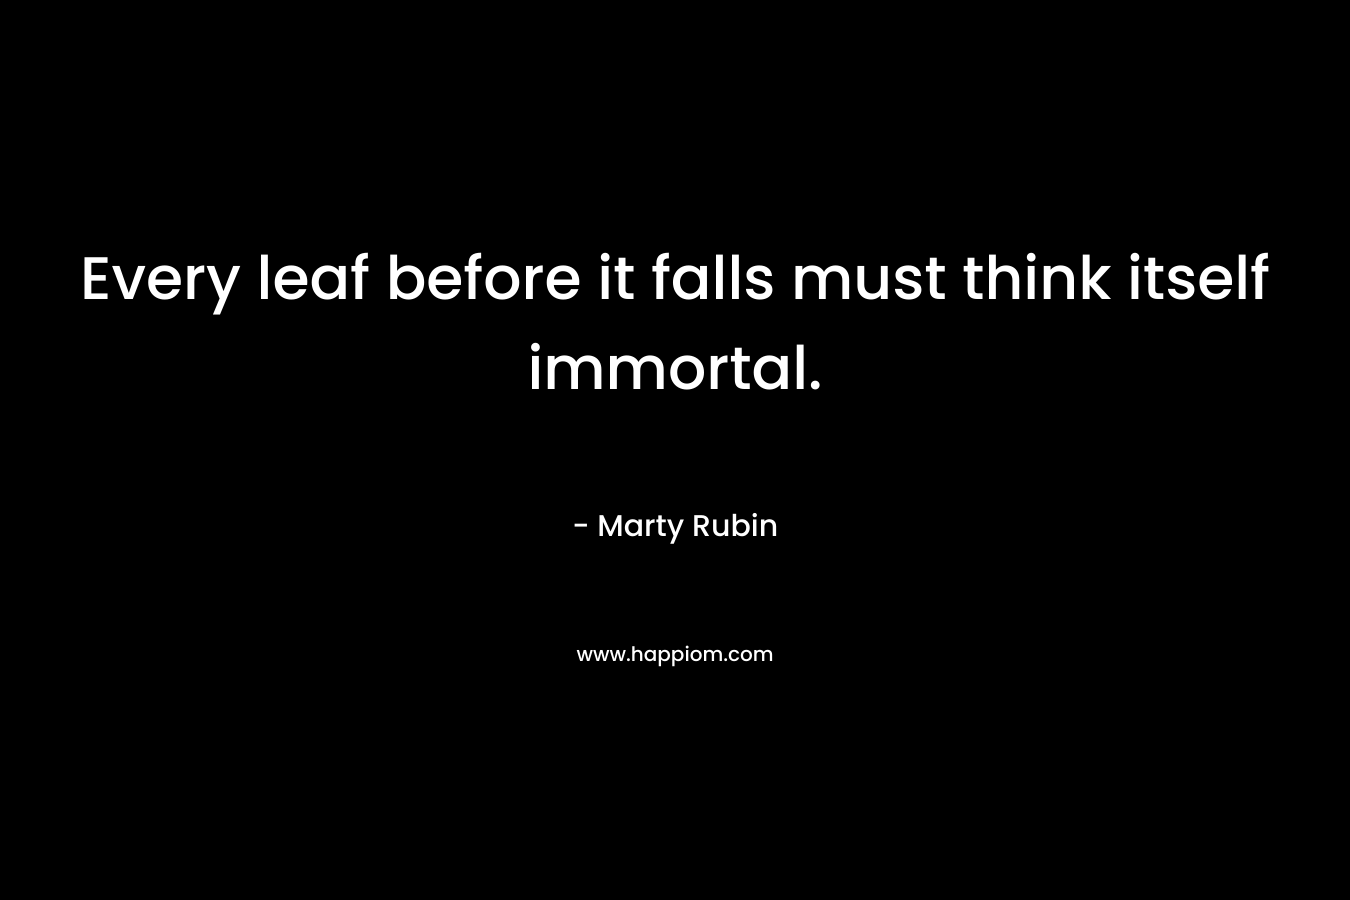 Every leaf before it falls must think itself immortal.